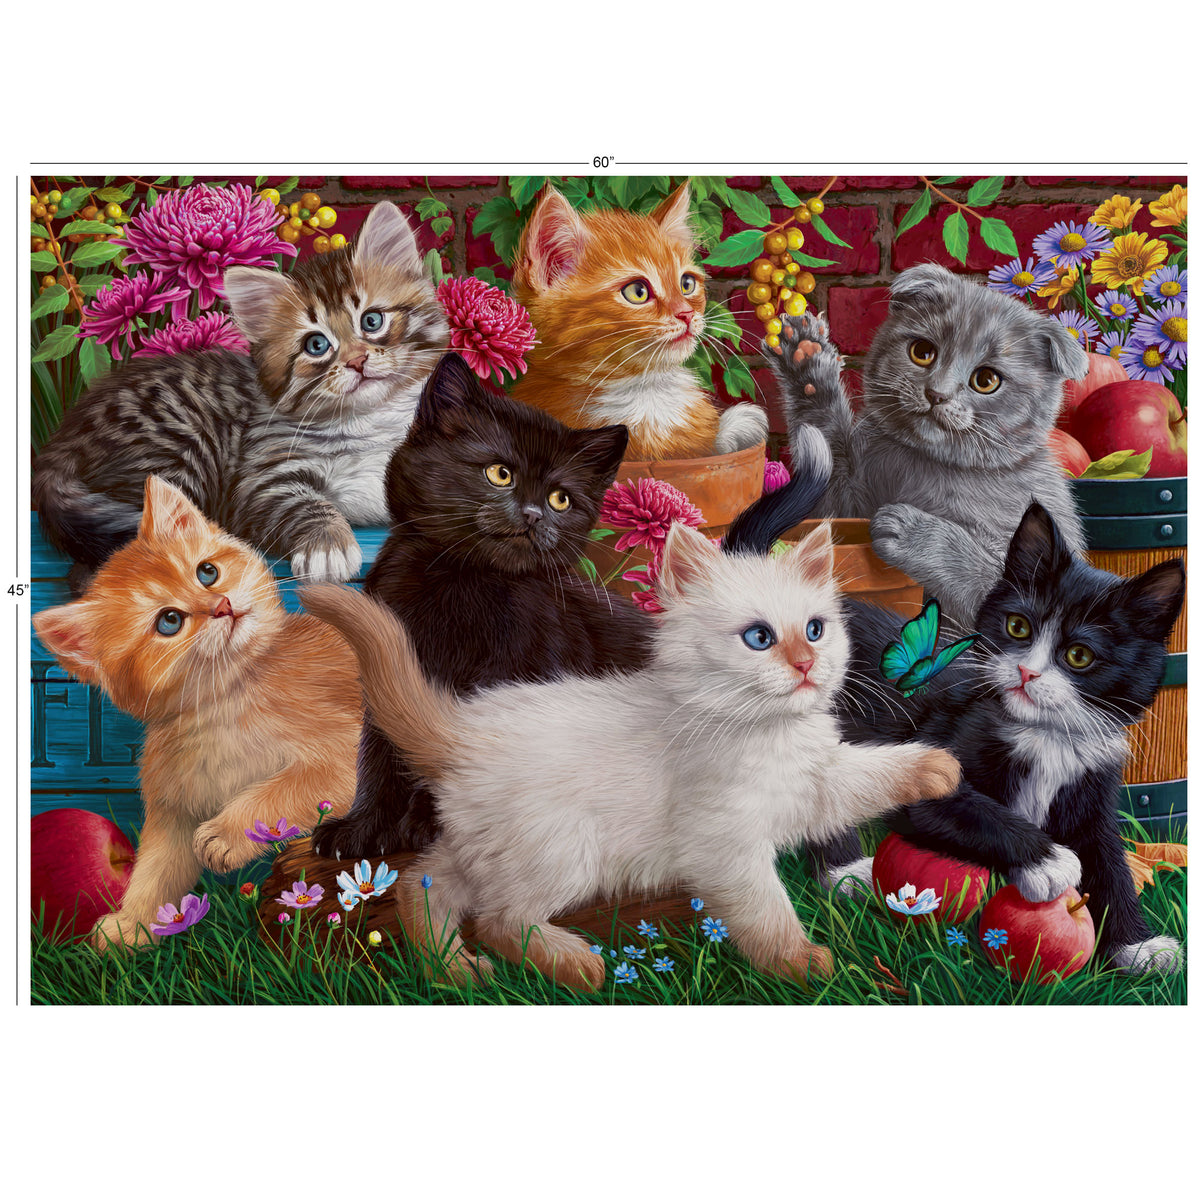 Kittens at Play Panel 45x60"